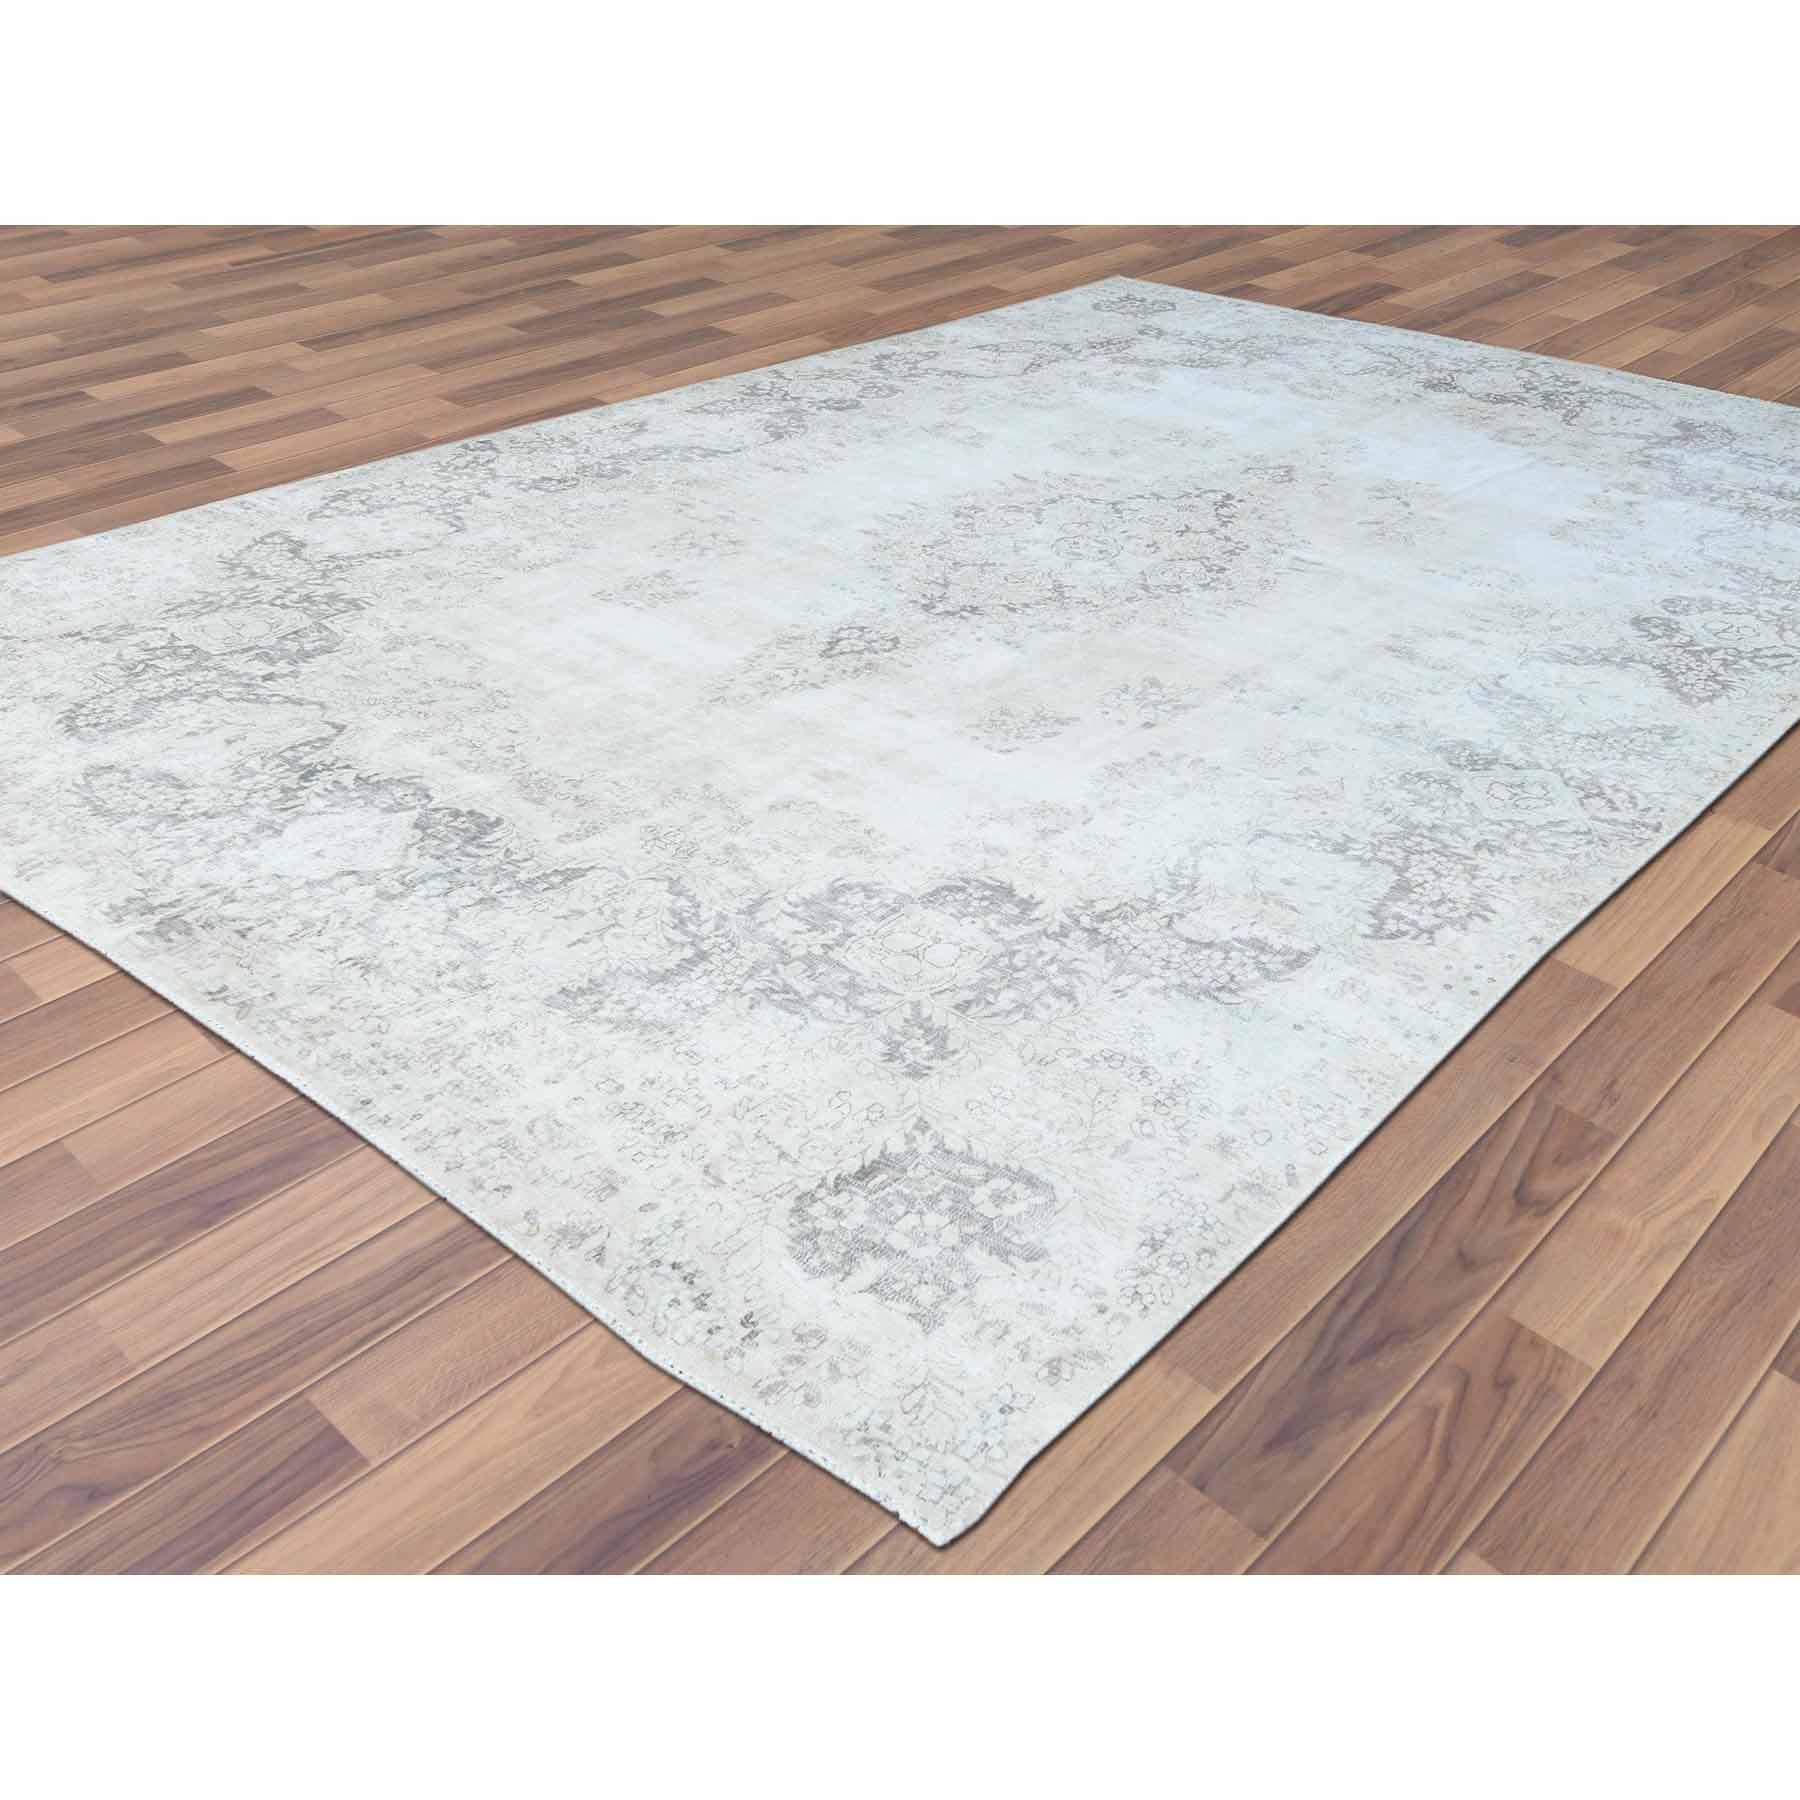 Overdyed-Vintage-Hand-Knotted-Rug-308700